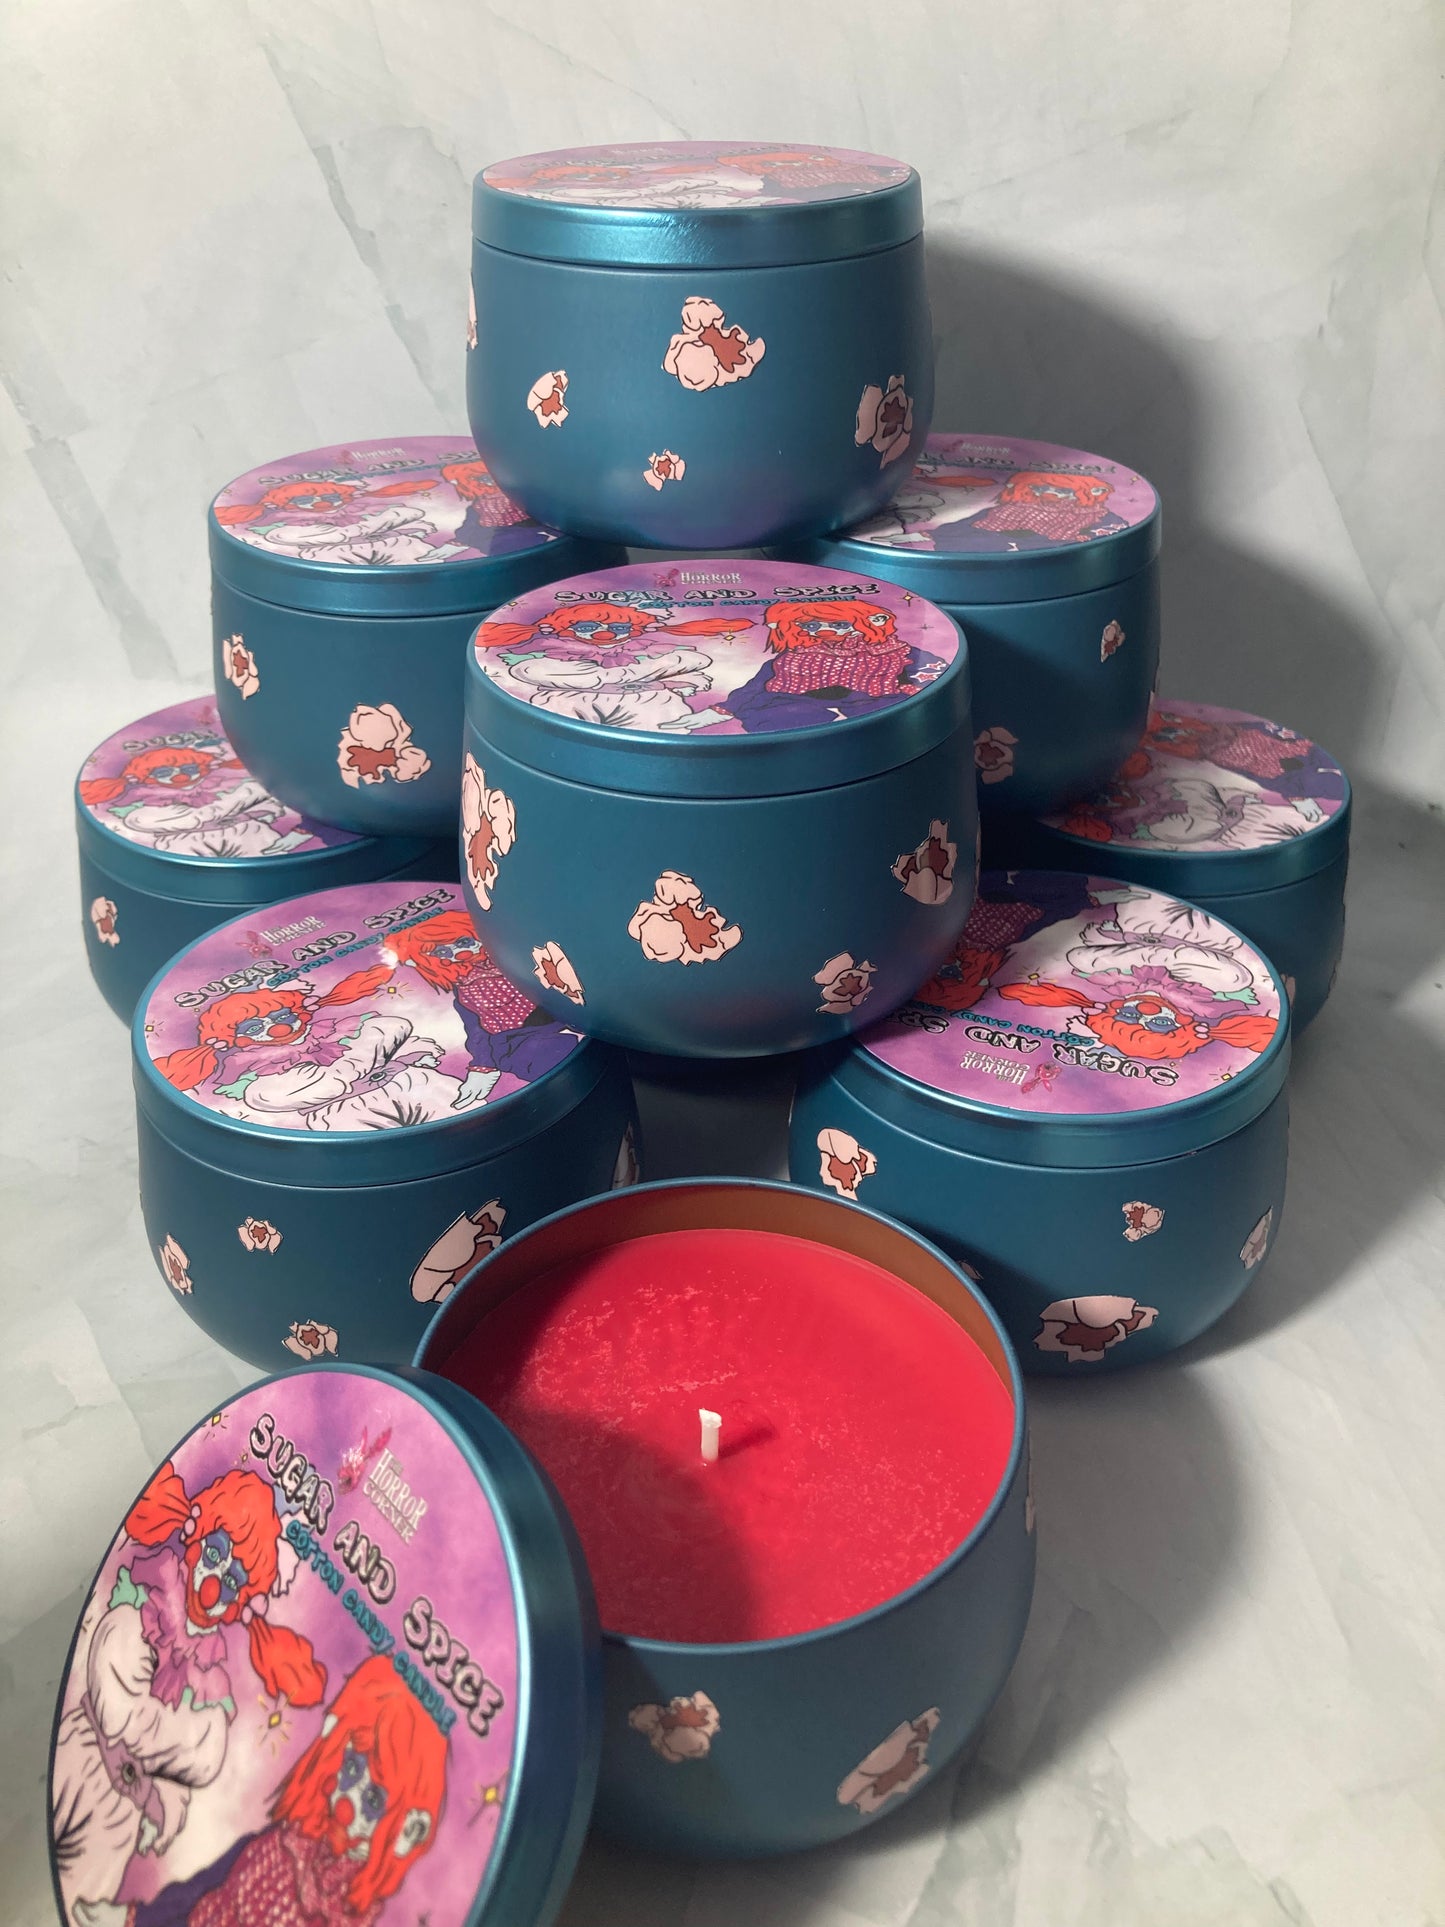 Clown Girls candle